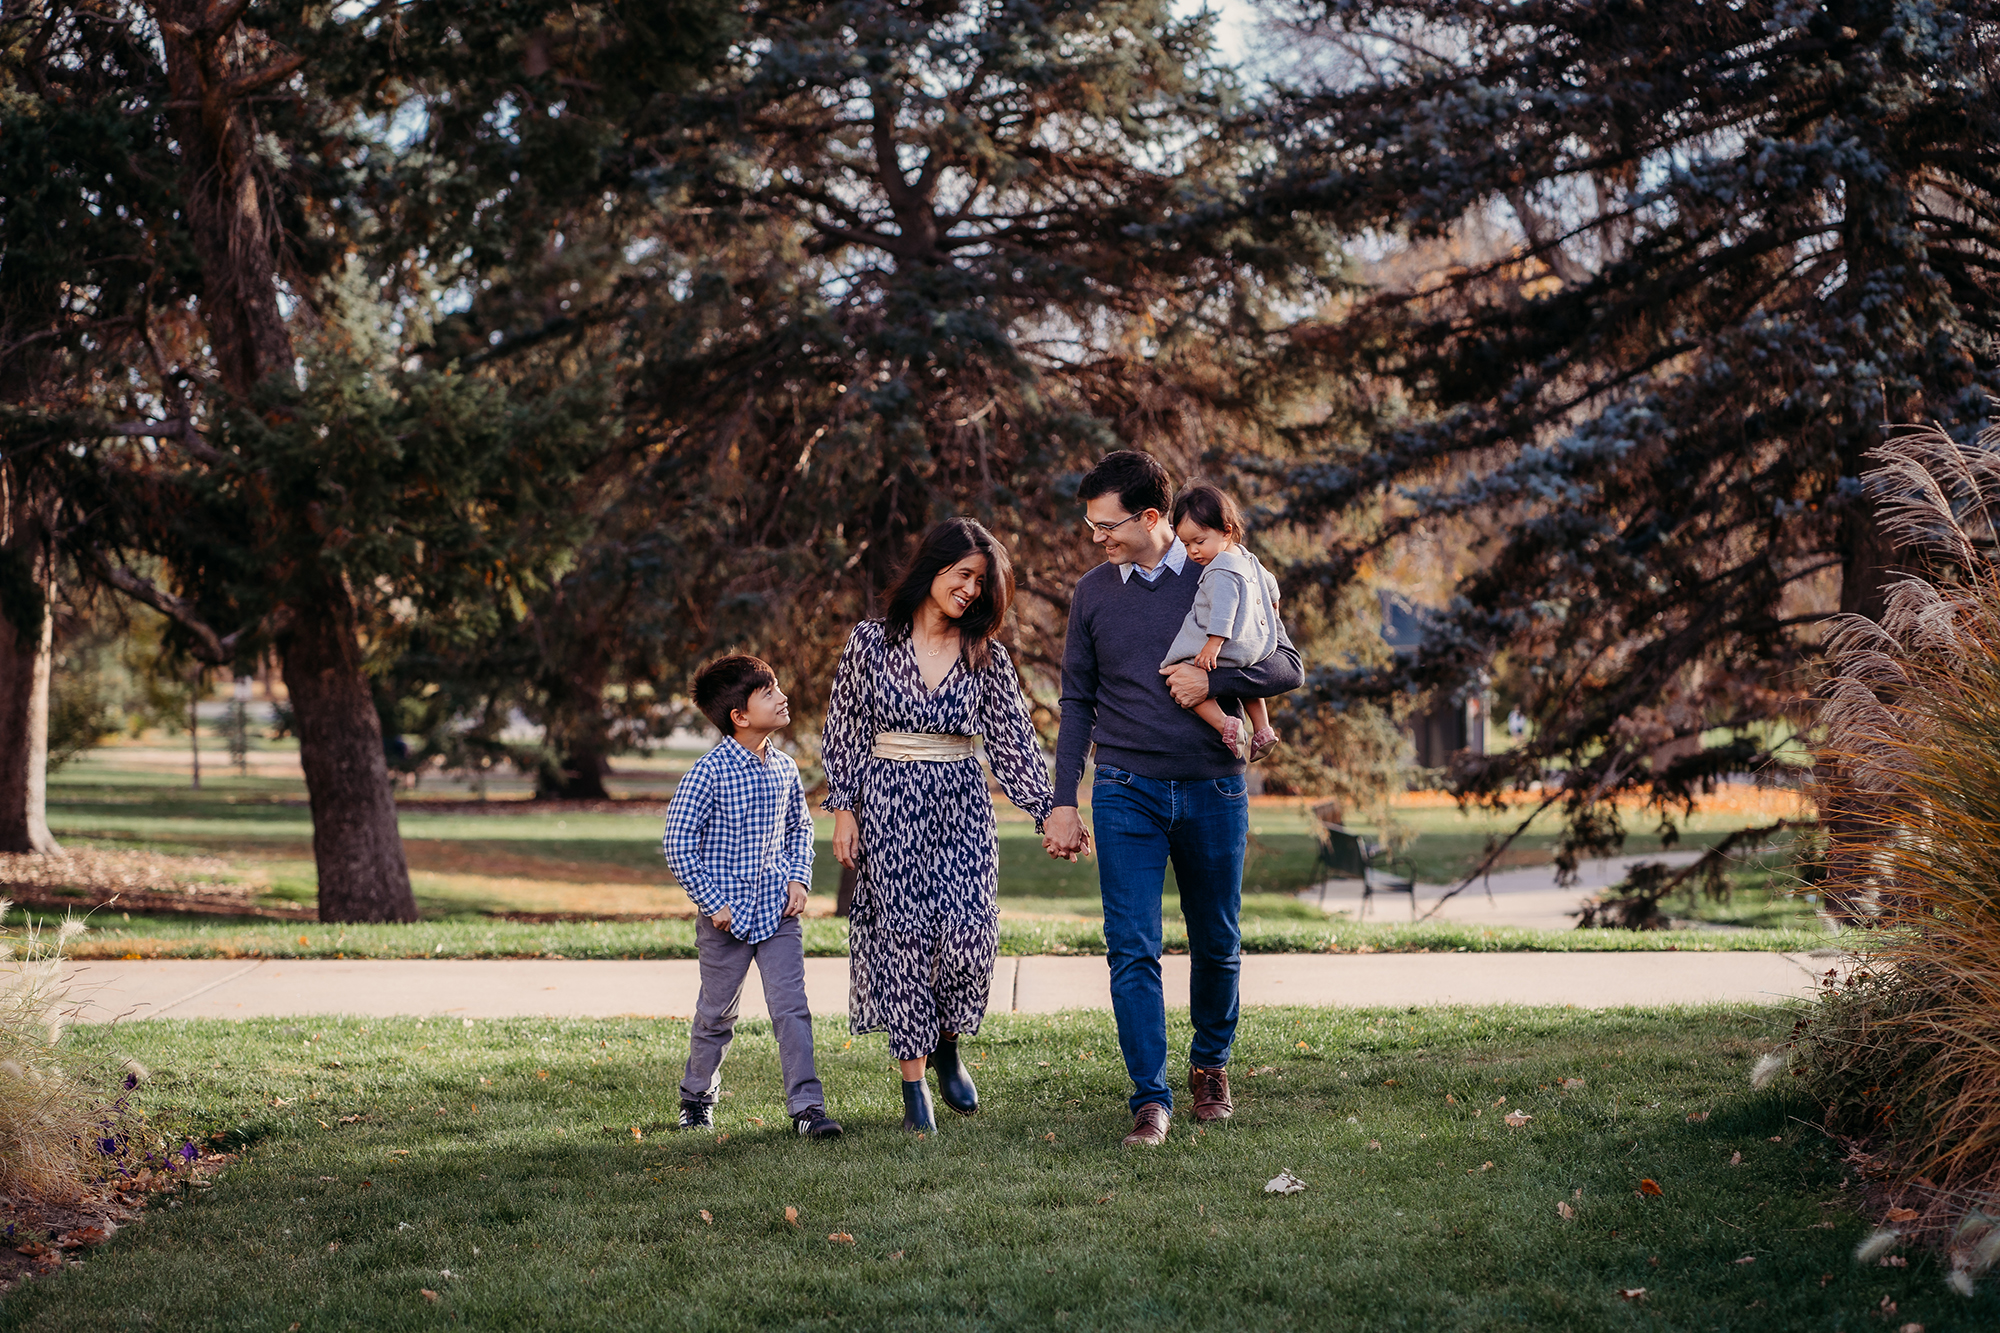 A family walks holding hands under evergreen trees at Cheesman Park in Denver for their Denver family photos with Denver family photographers